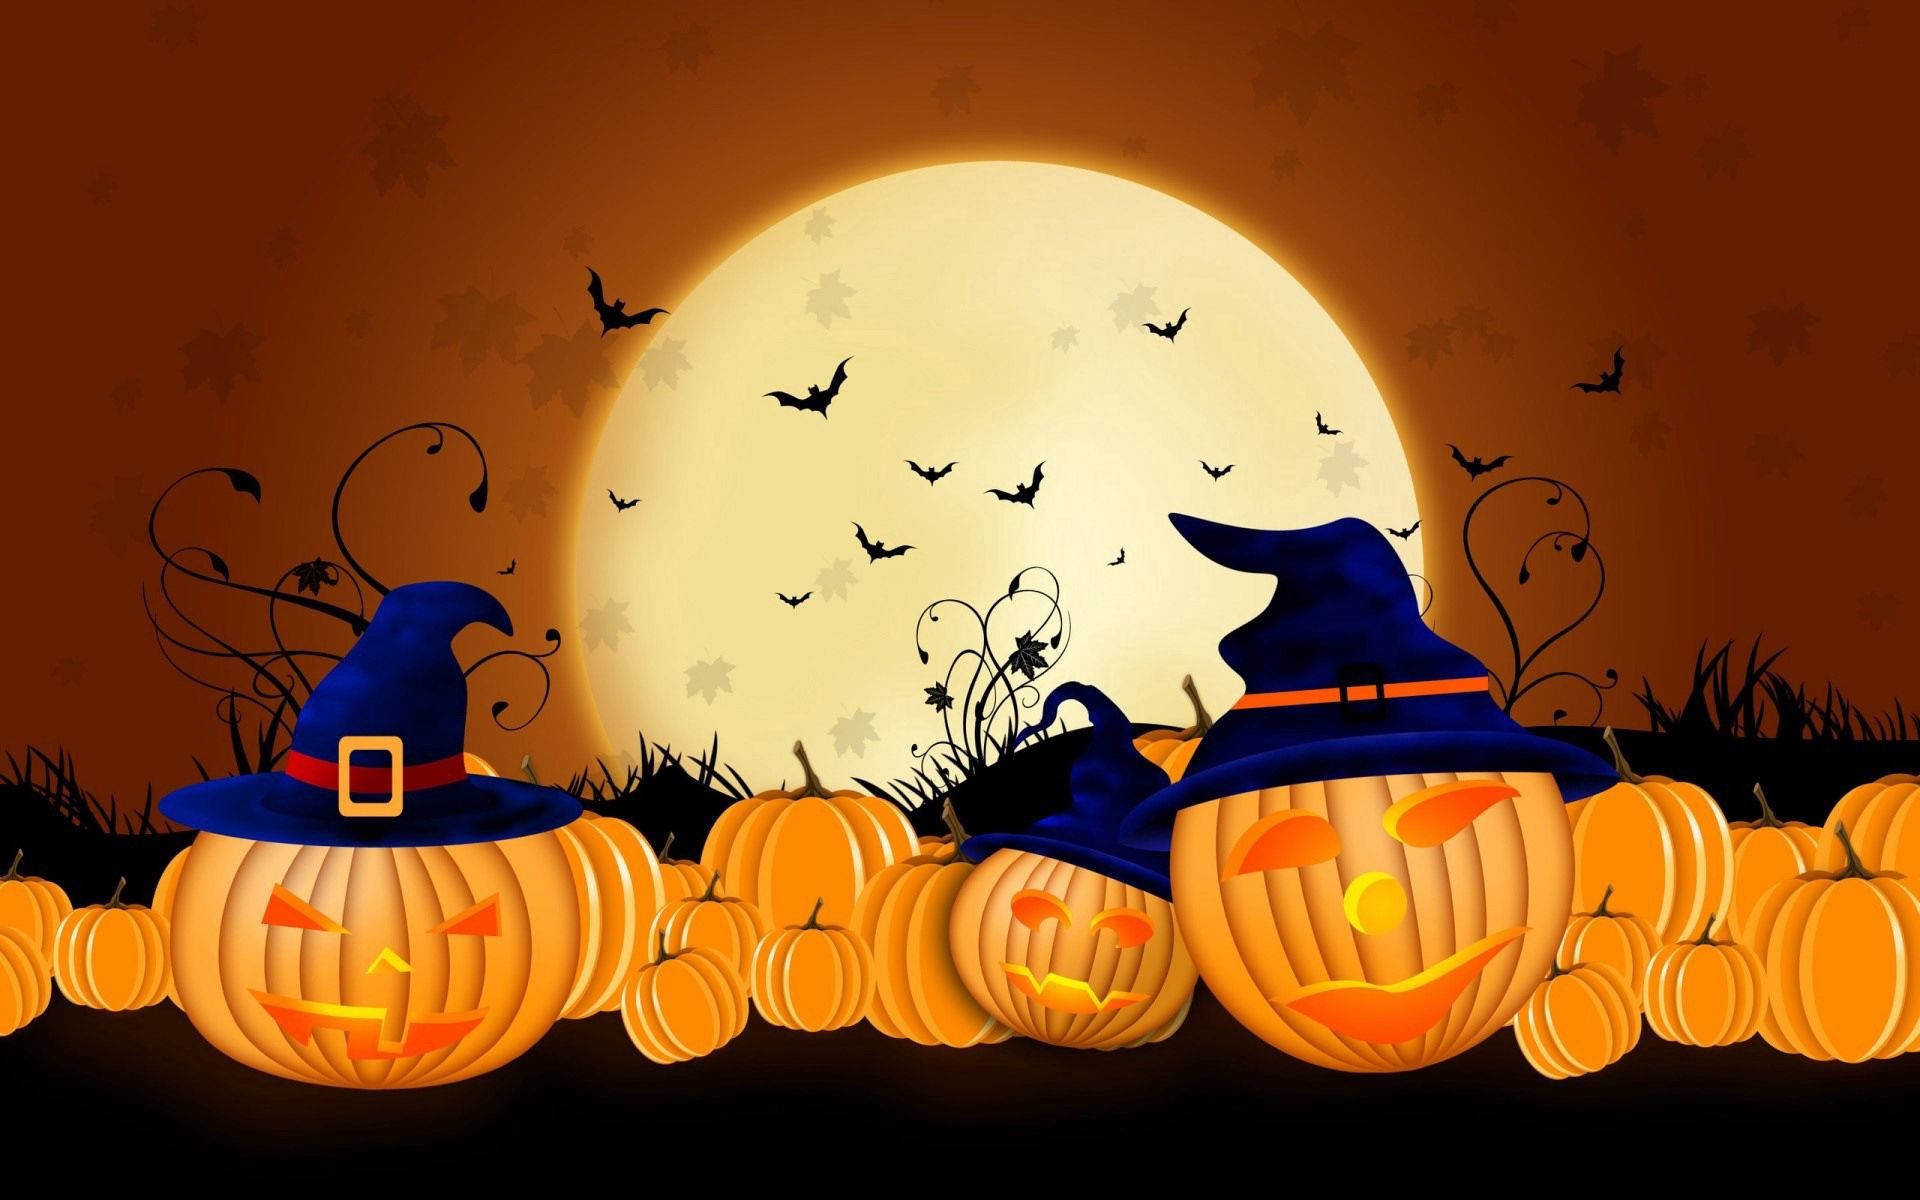 Celebrate the Magic of Halloween with Colorful Pumpkins! Wallpaper